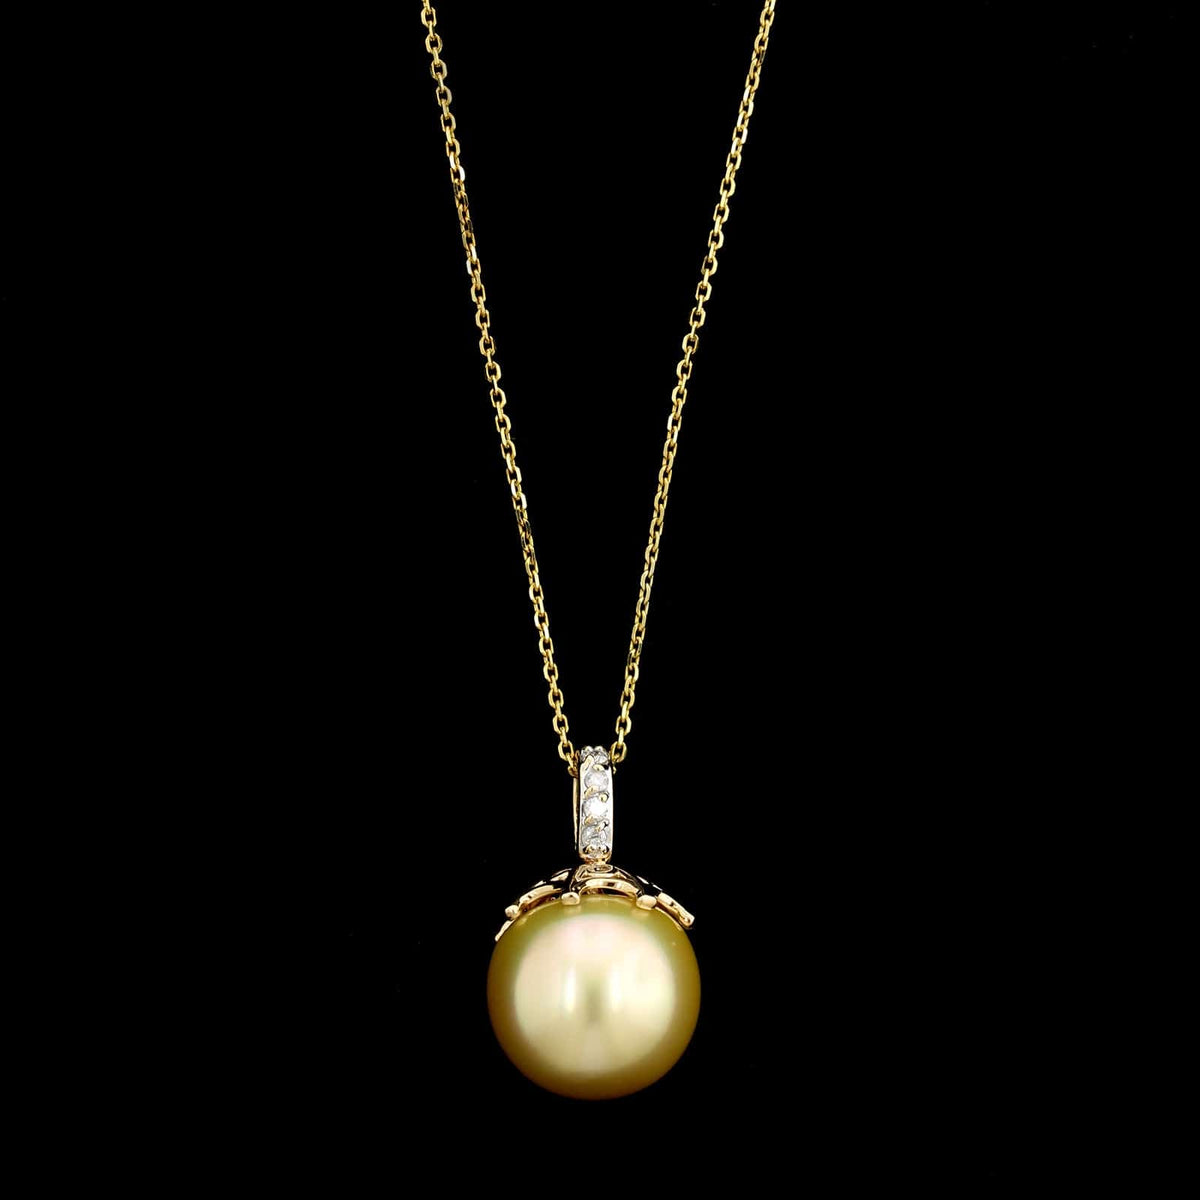 14K Yellow Gold Estate Cultured Golden South Sea Pearl and Diamond Pendant Necklace